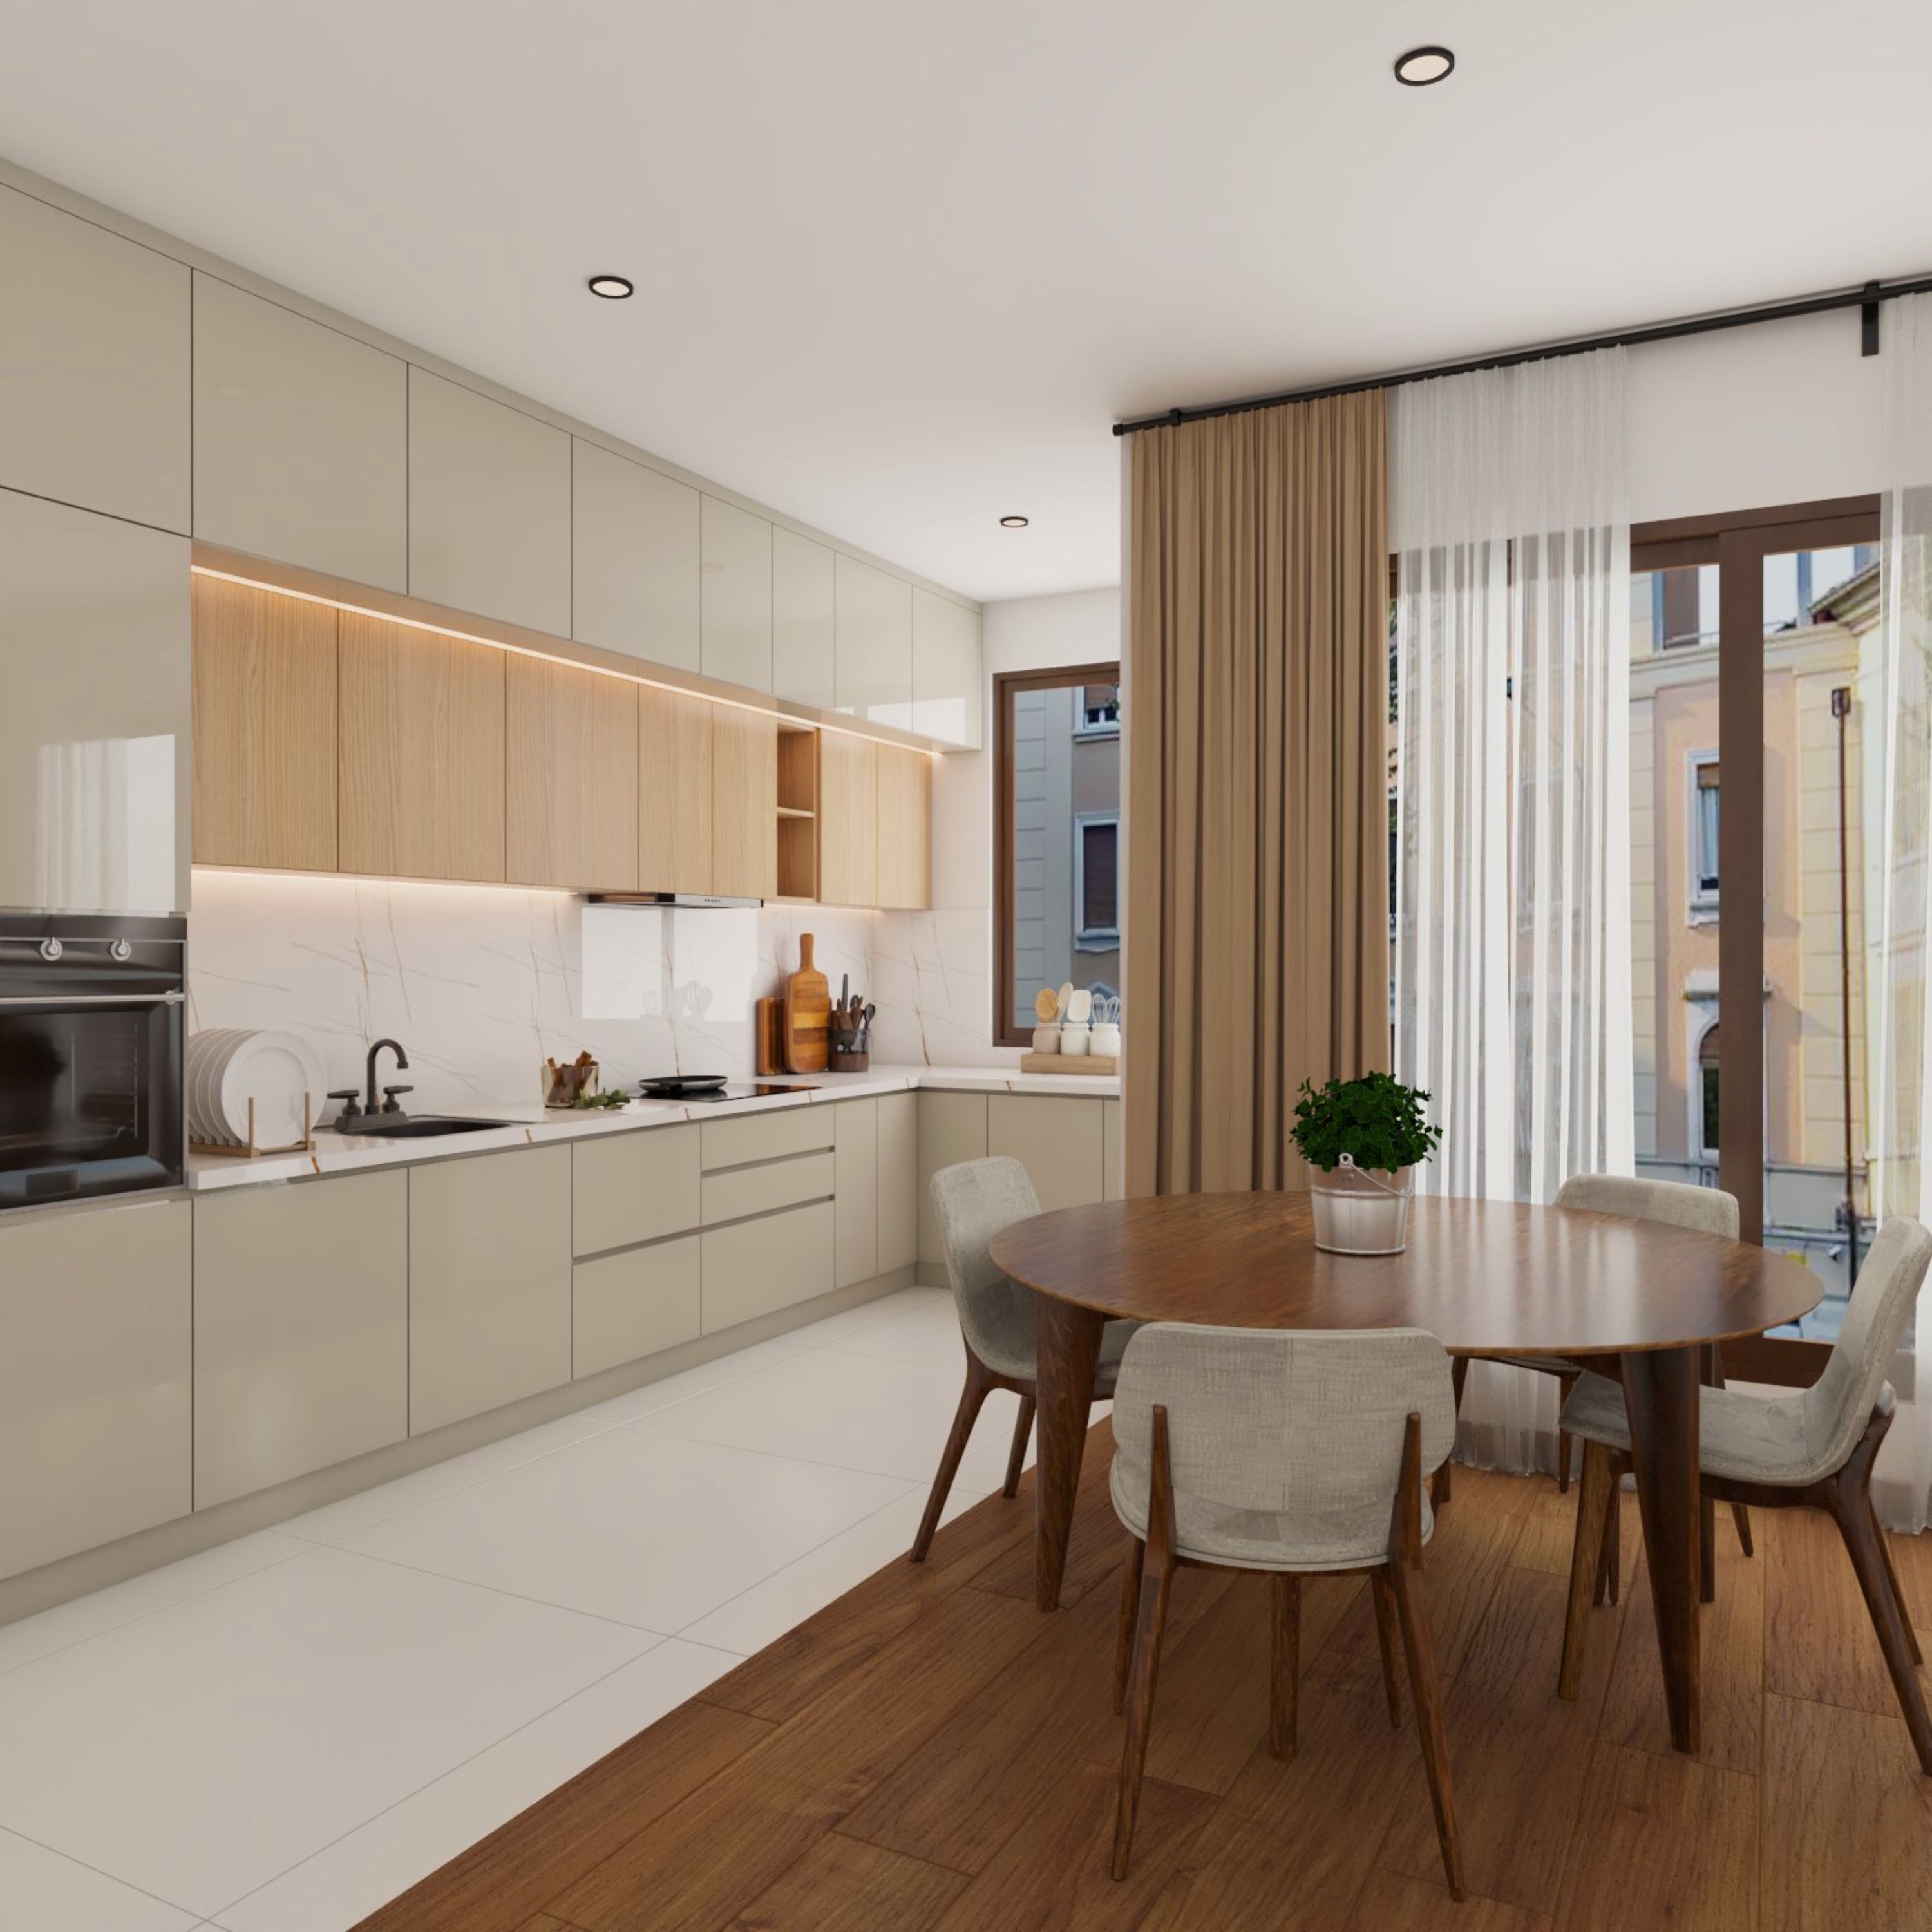 Modern Beige And Wood L-Shaped Kitchen Design With Integrated Dining Table